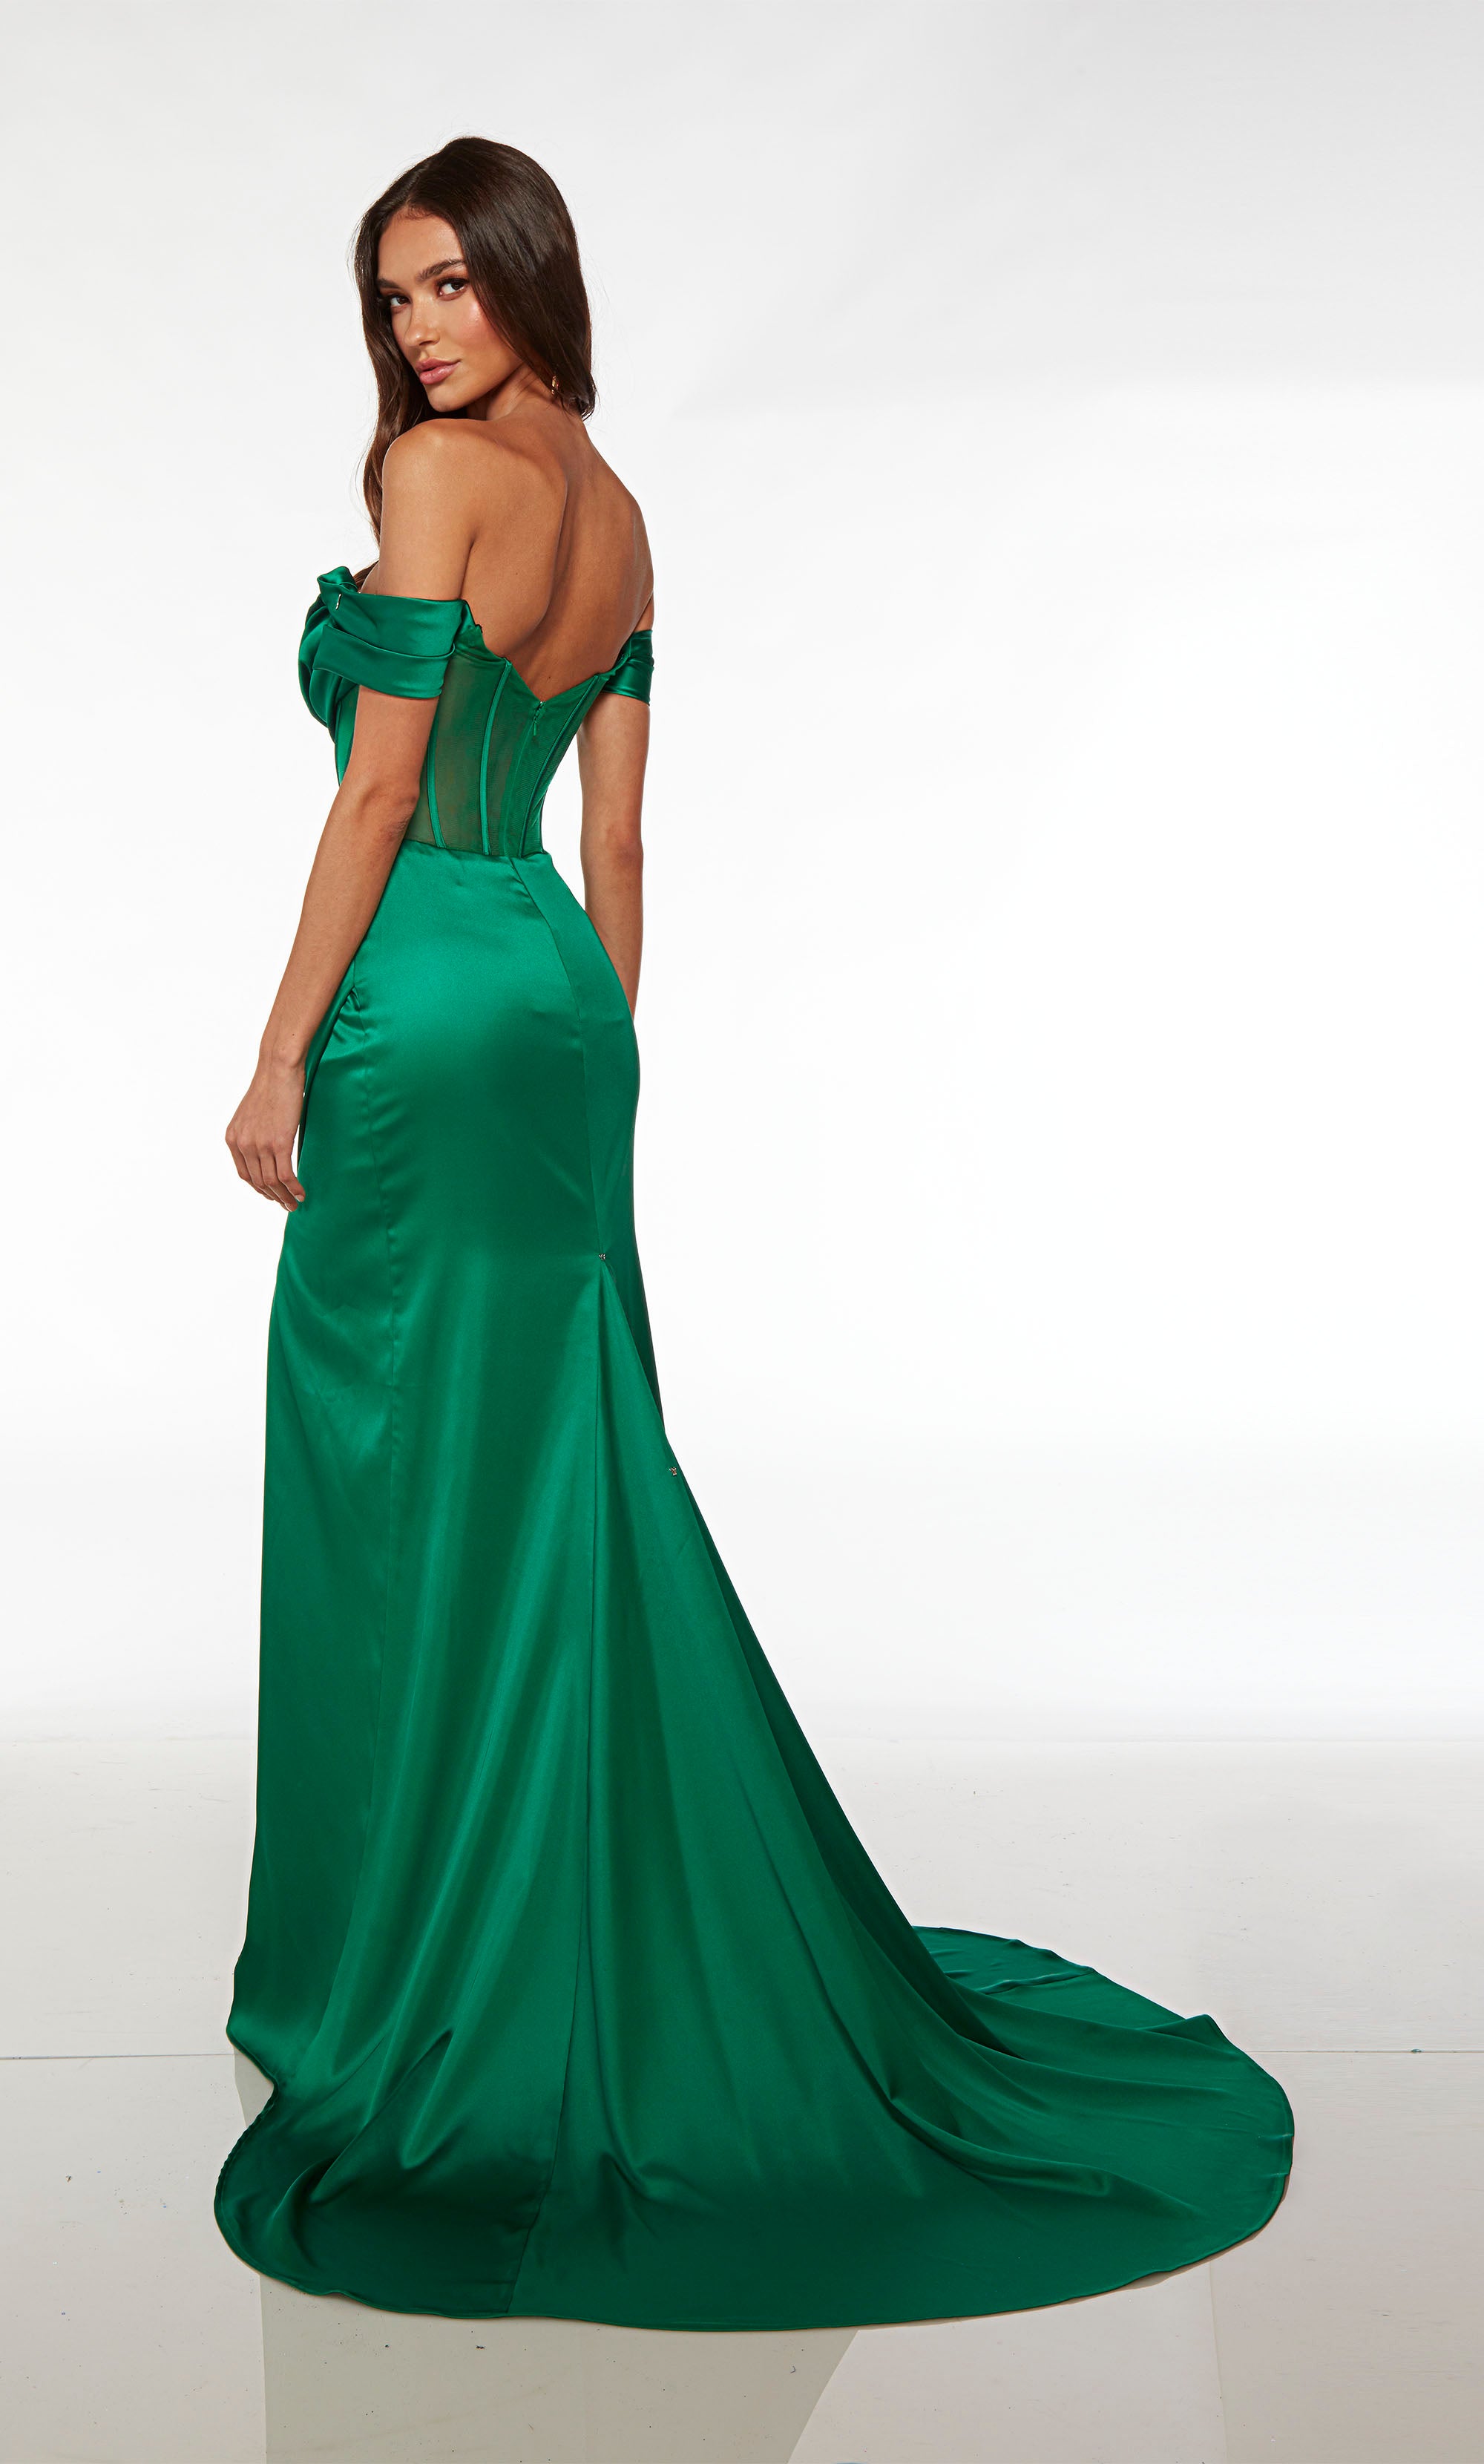 Emerald green satin prom dress: Off-the-shoulder cowl neckline, detachable straps, sheer corset bodice, gathered skirt detail, and an elegant long train.